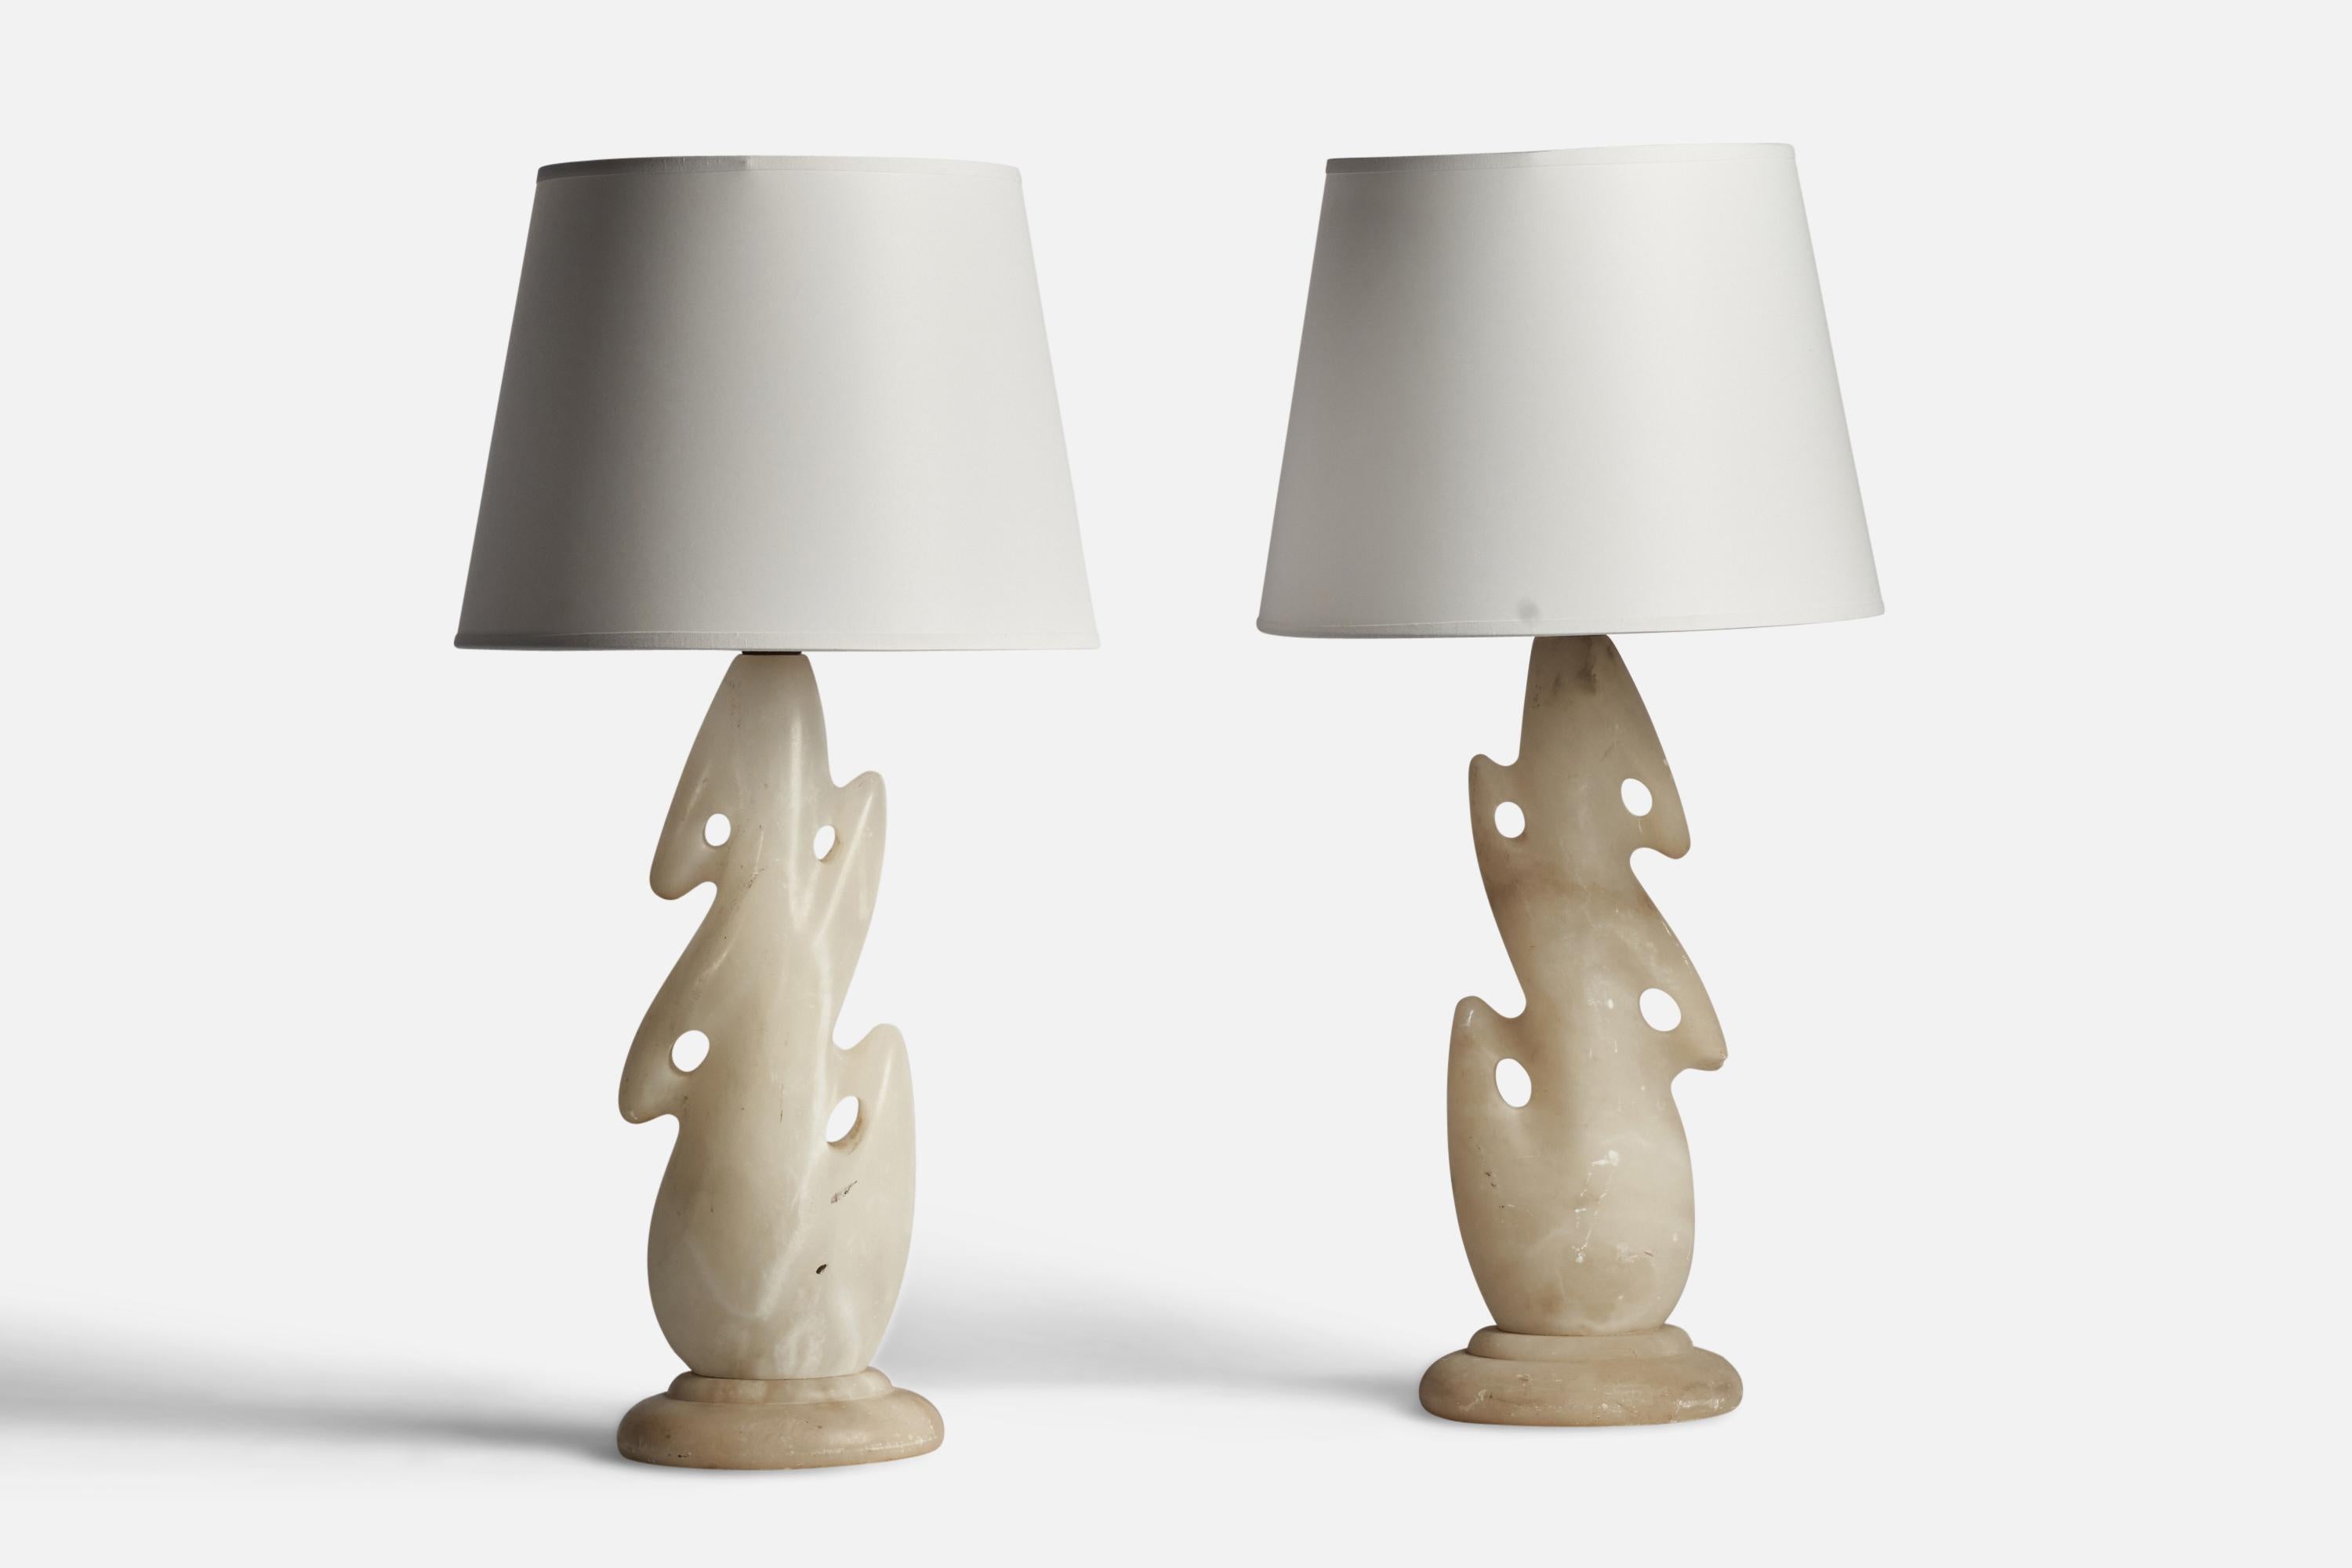 A pair of onyx table lamps designed and produced in the US, c. 1950s.

Dimensions of Lamp (inches): 18.75” H x 6.25” Diameter
Dimensions of Shade (inches): 9” Top Diameter x 12” Bottom Diameter x 9” H 
Dimensions of Lamp with Shade (inches): 24” H x